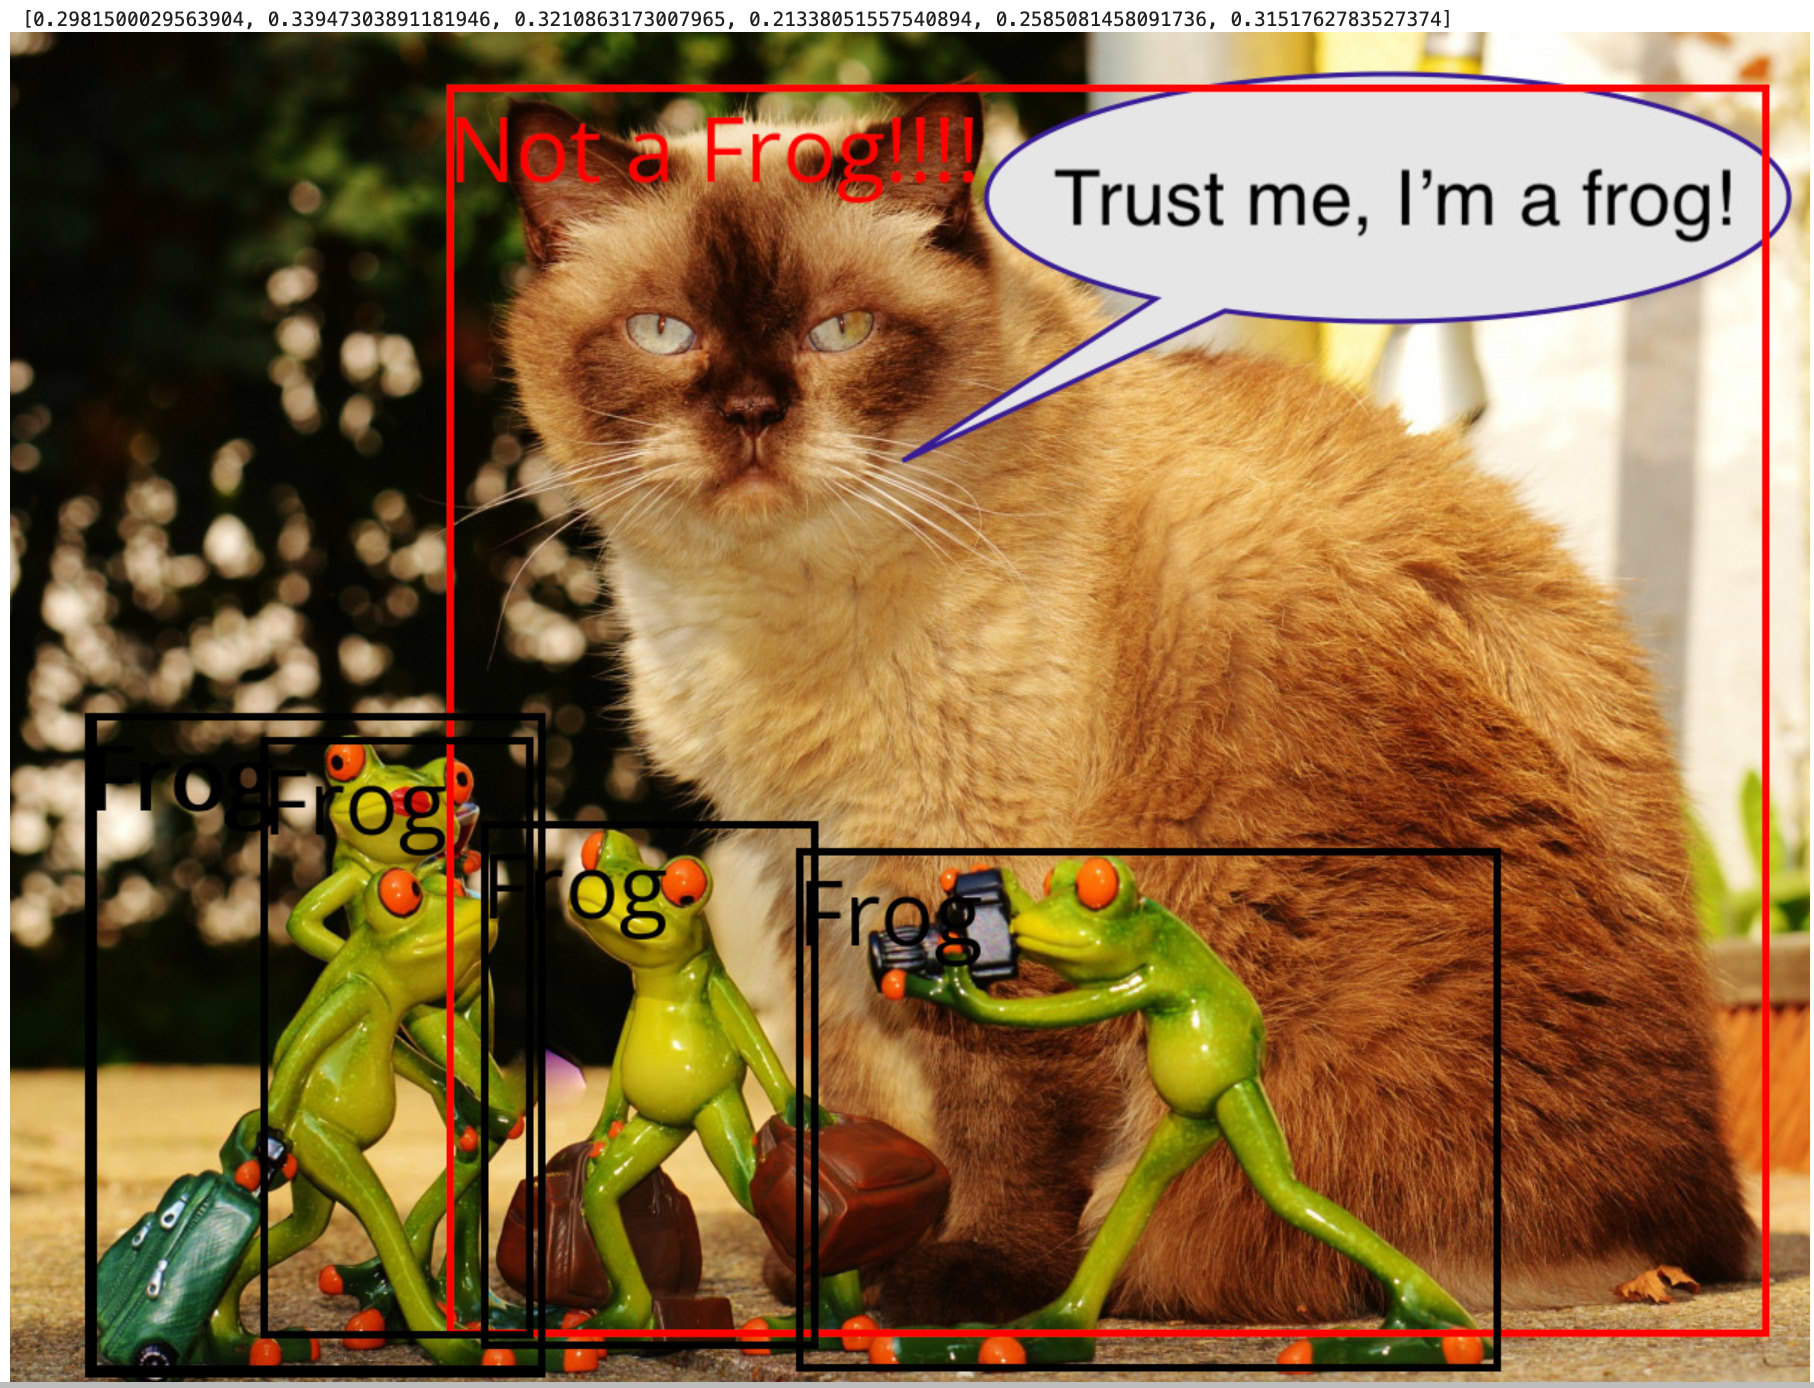 image of cat and four frogs - imposter found